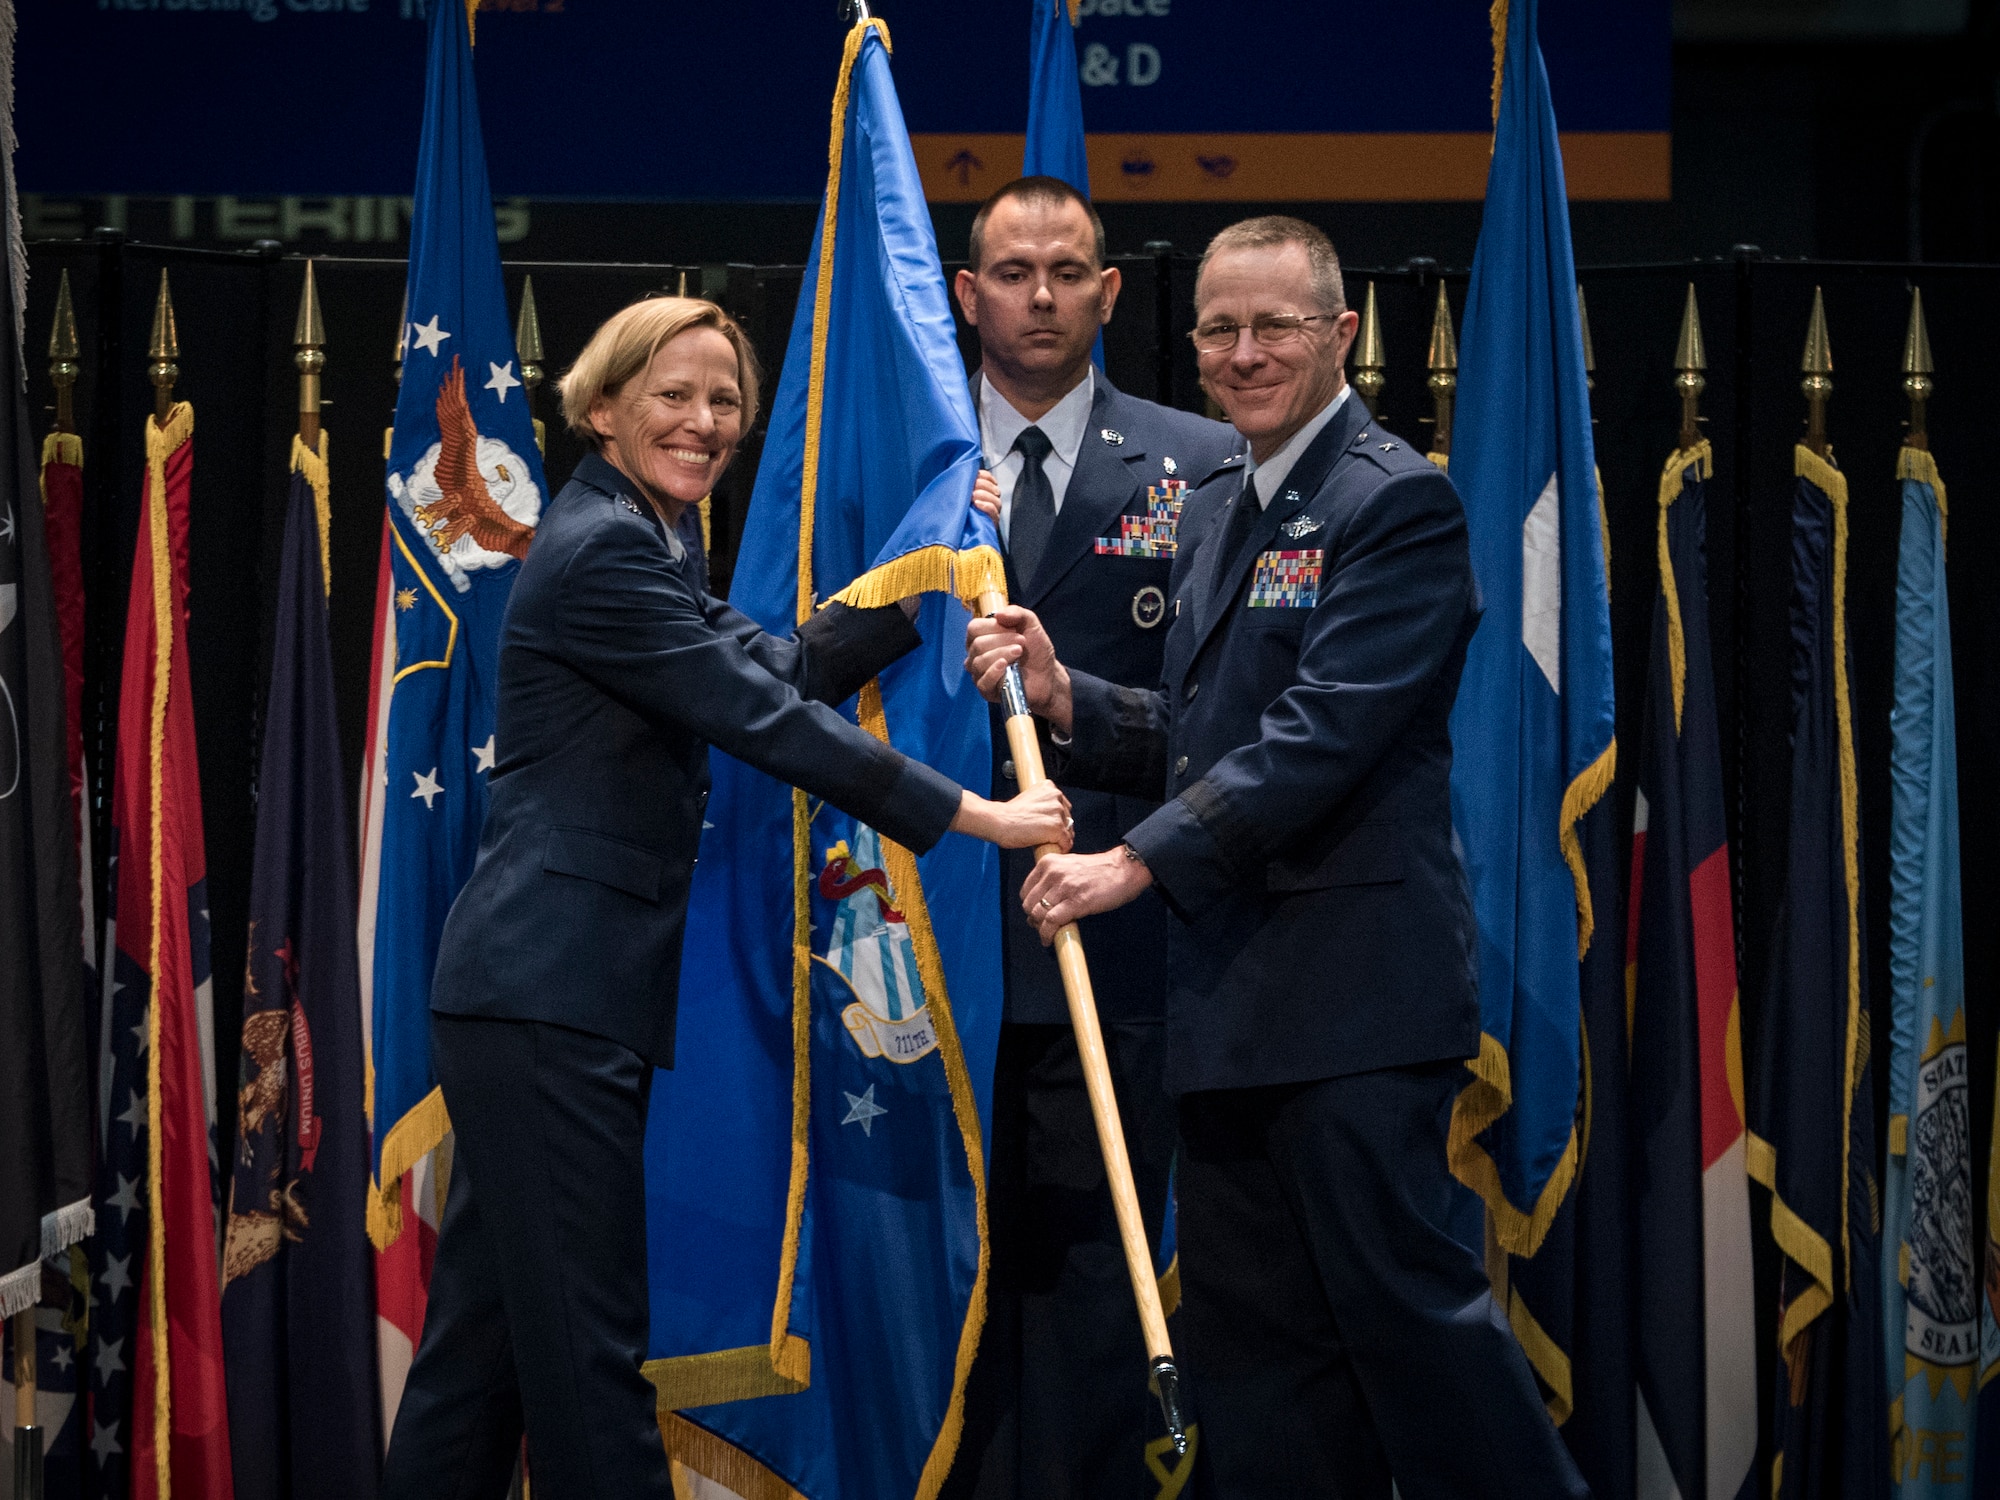 Maj. Gen. Heather Pringle, Air Force Research Laboratory commander, passes the 711th Human Performance flag to Brig. Gen. (Dr.) John Andrus during an assumption of command ceremony July 19, 2021 at the National Museum of the U.S. Air Force. (U.S. Air Force photo by Richard Eldridge)